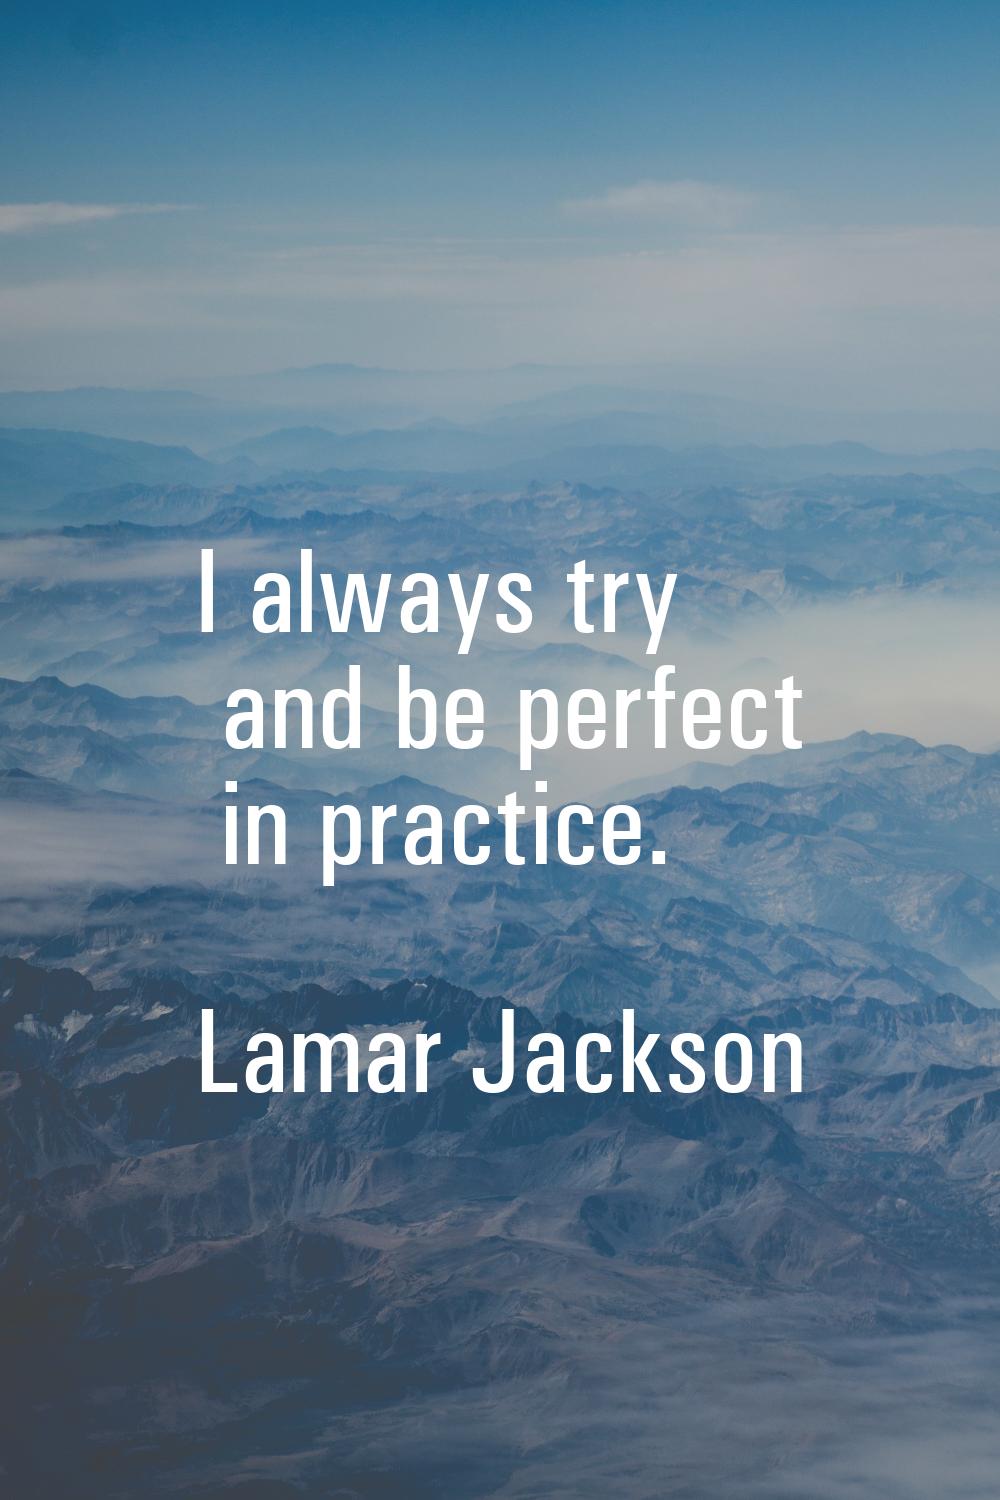 I always try and be perfect in practice.